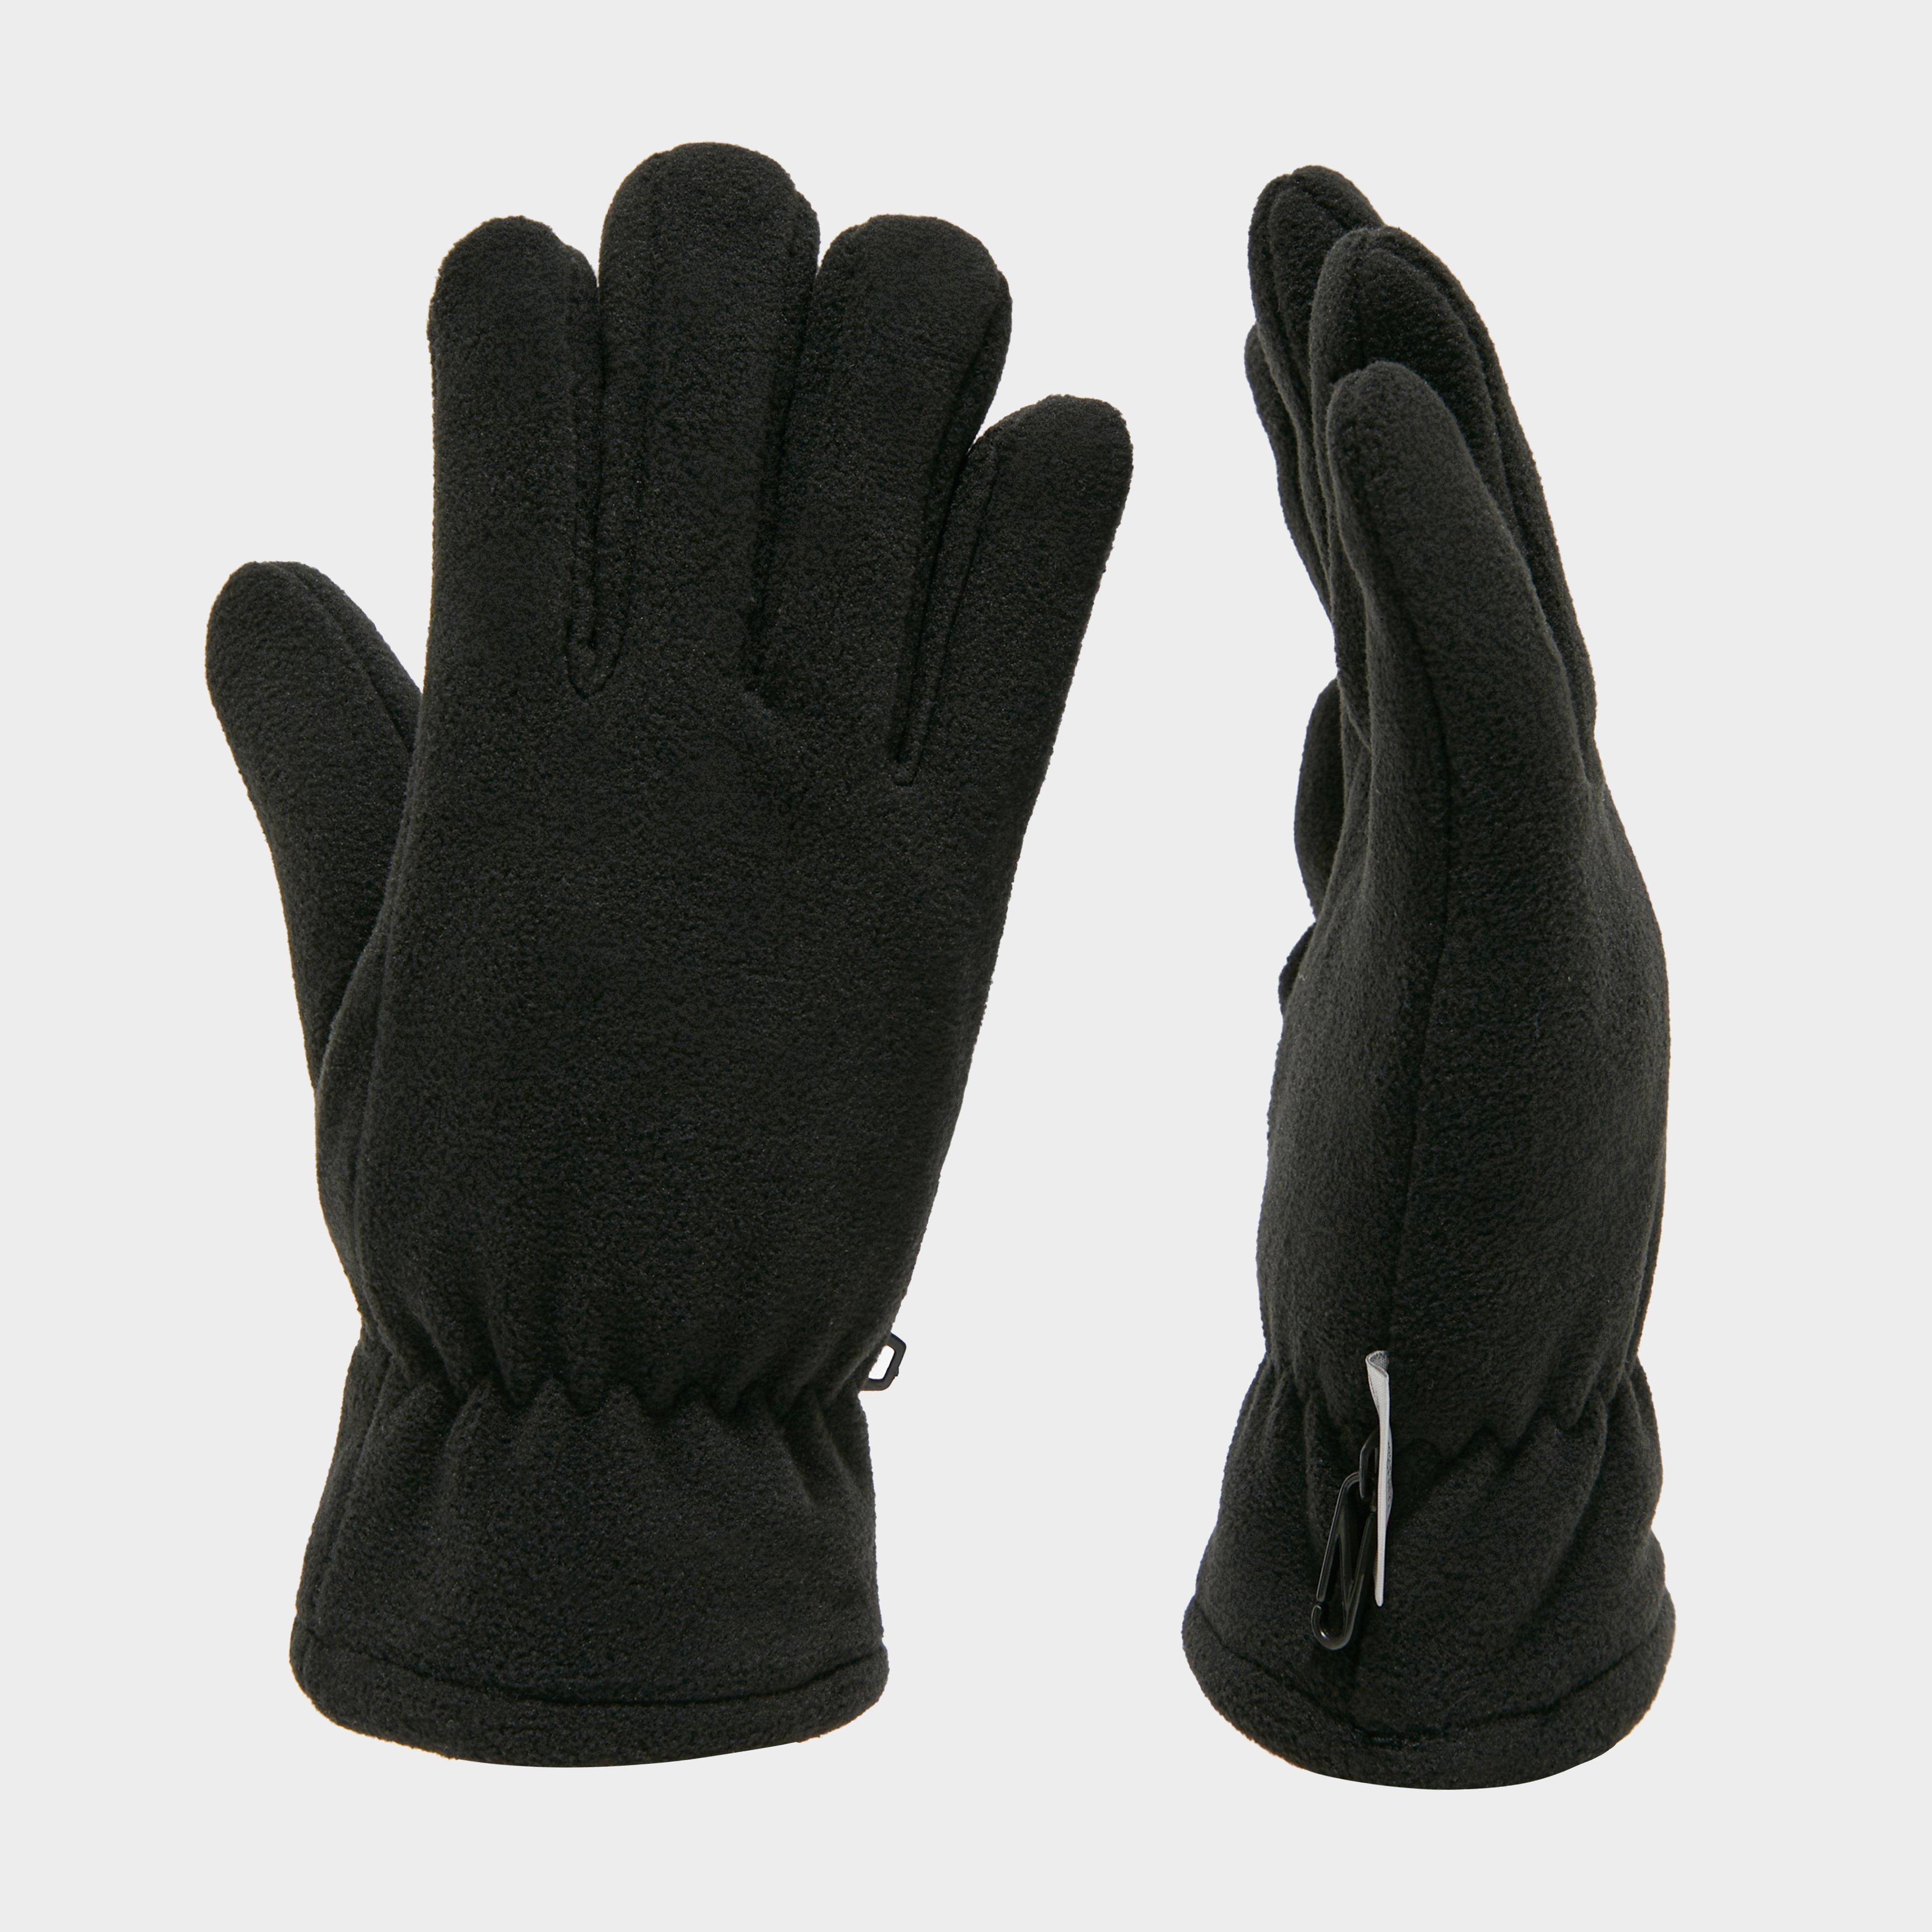 Image of Peter Storm Thinsulate Double Fleece Gloves - Black, Black